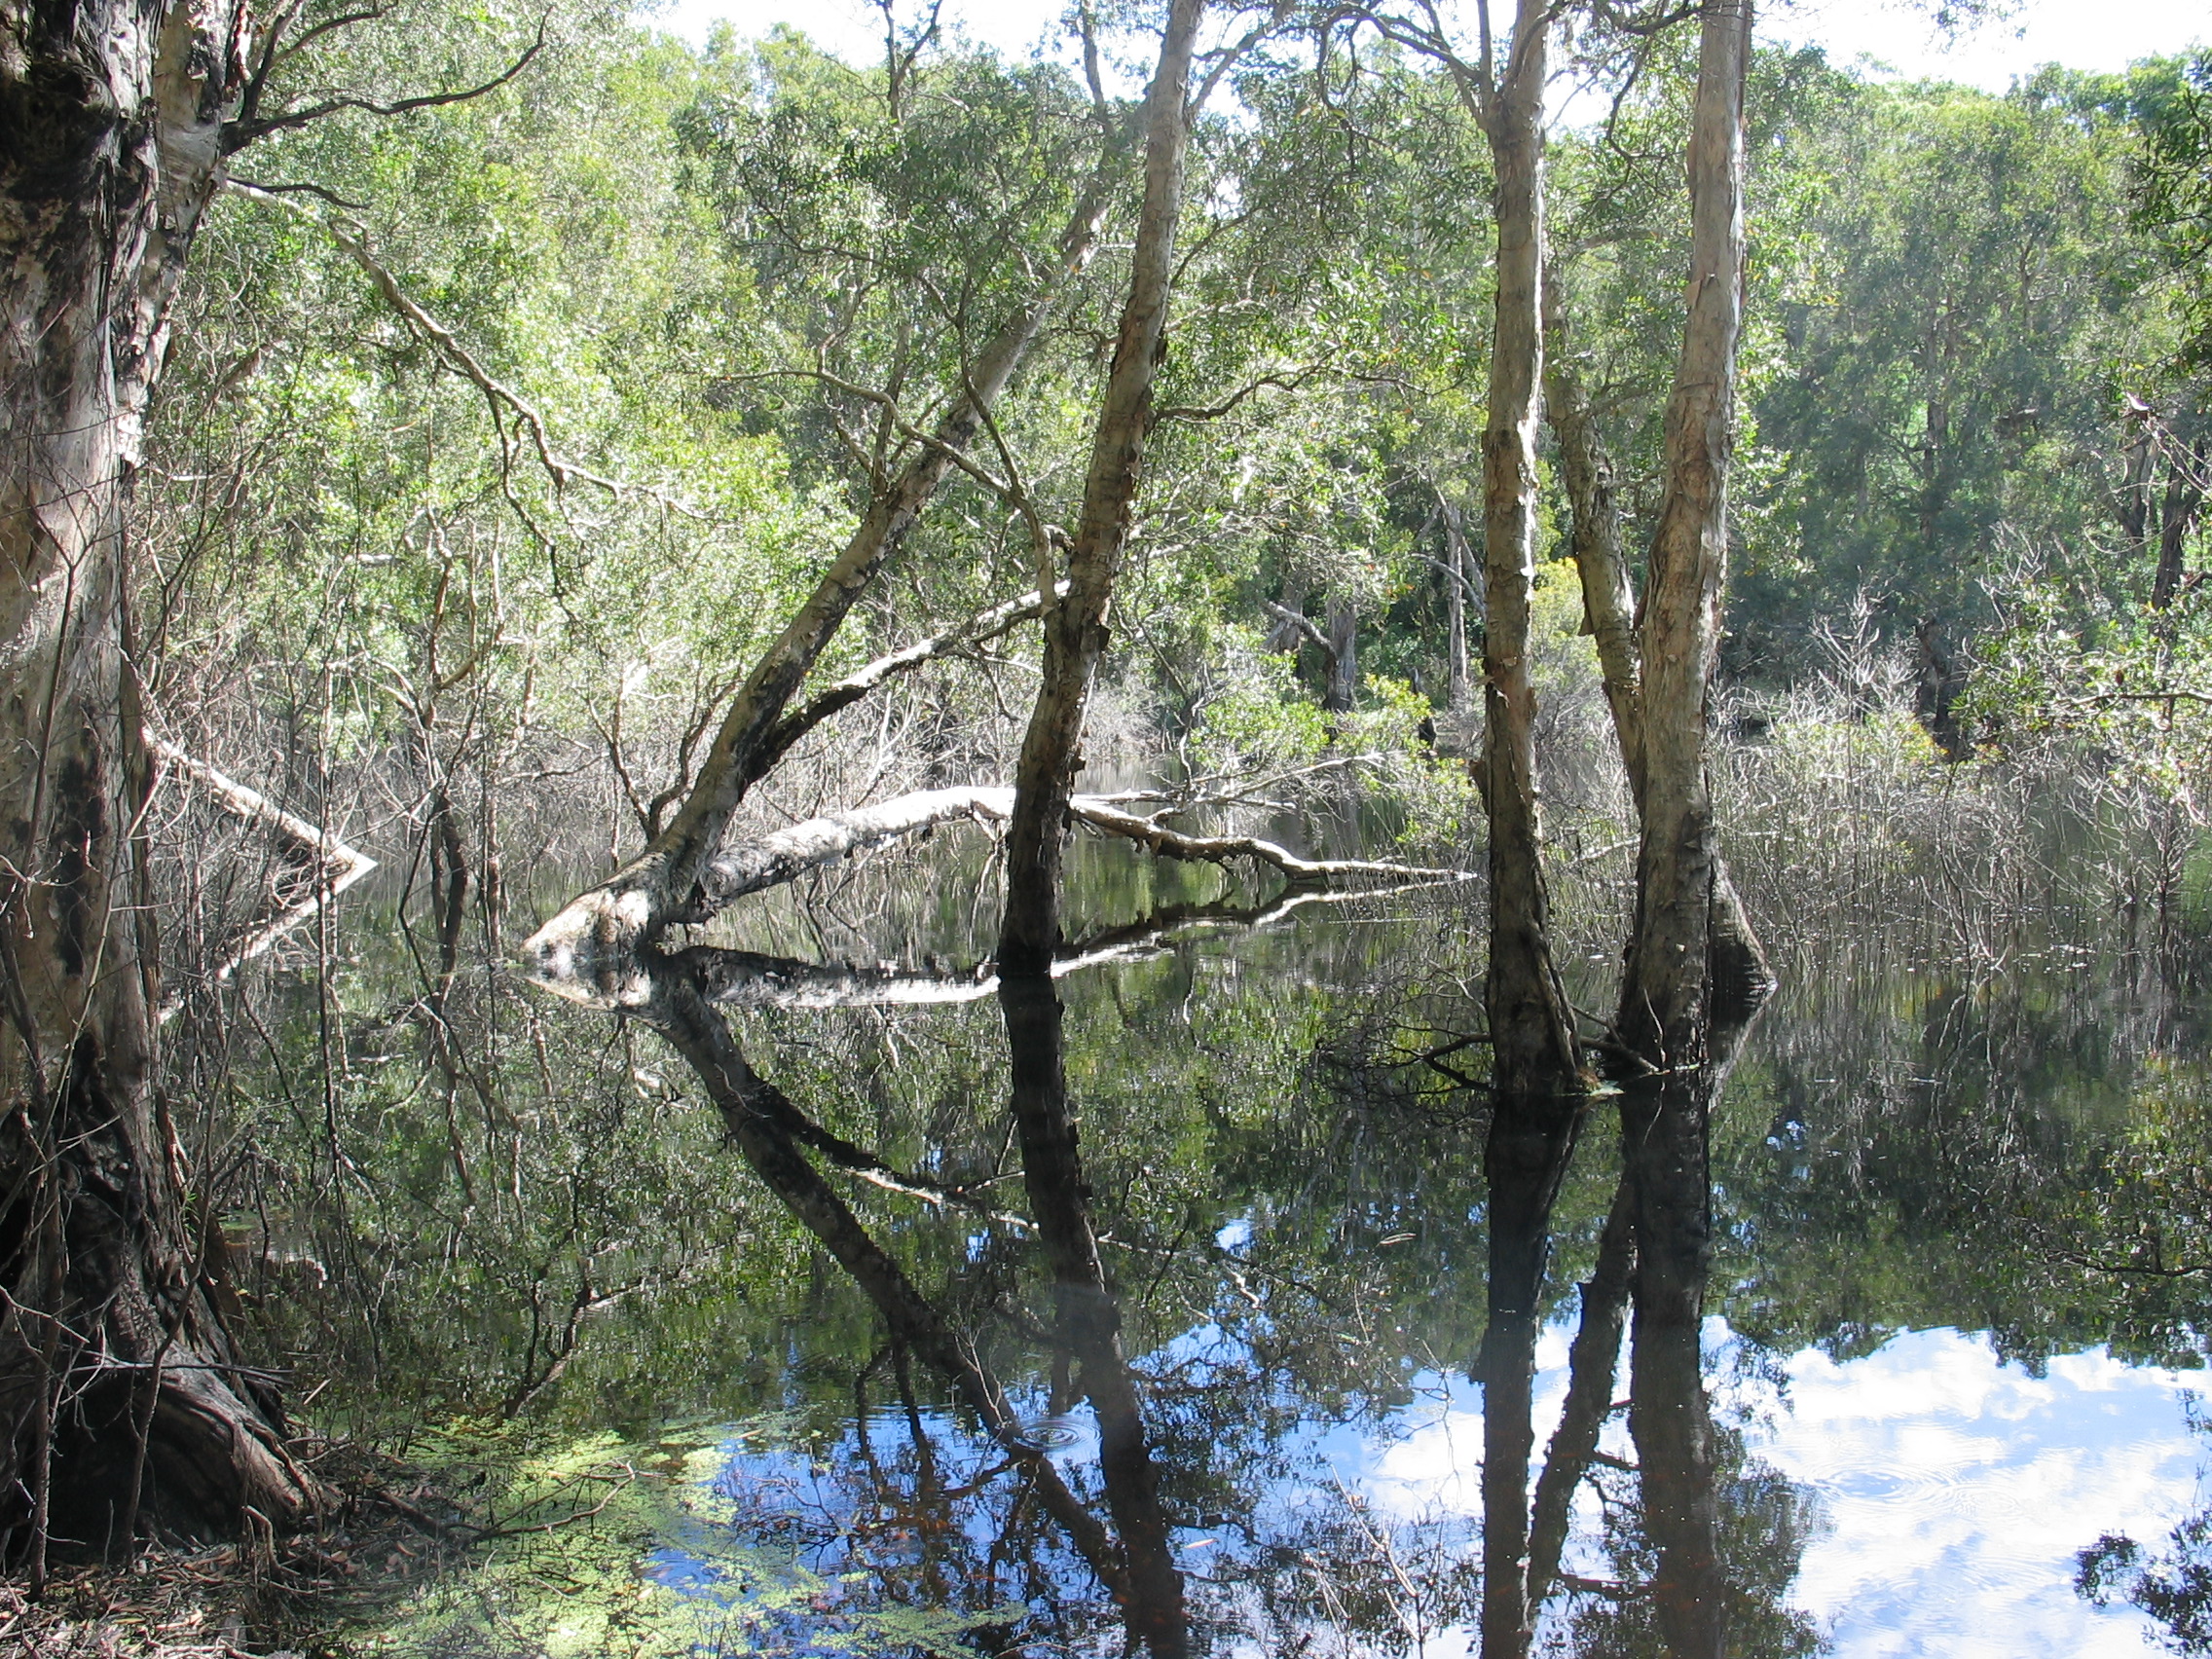 Waterlogged forest with many trees growing out of the water.